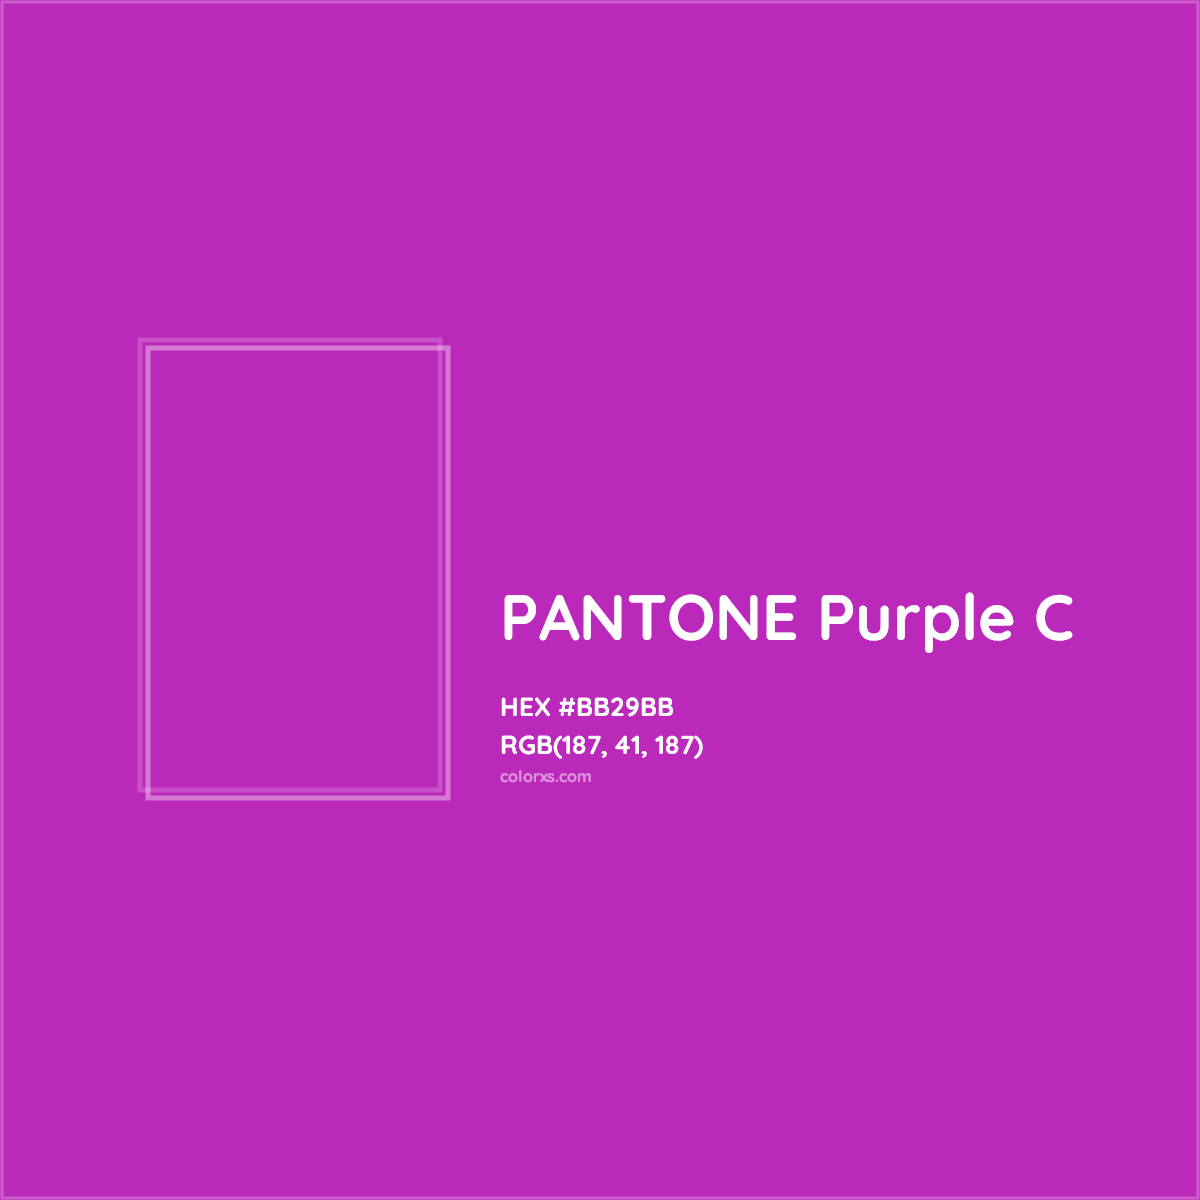 PANTONE Purple C Complementary or Opposite Color Name and Code (BB29BB